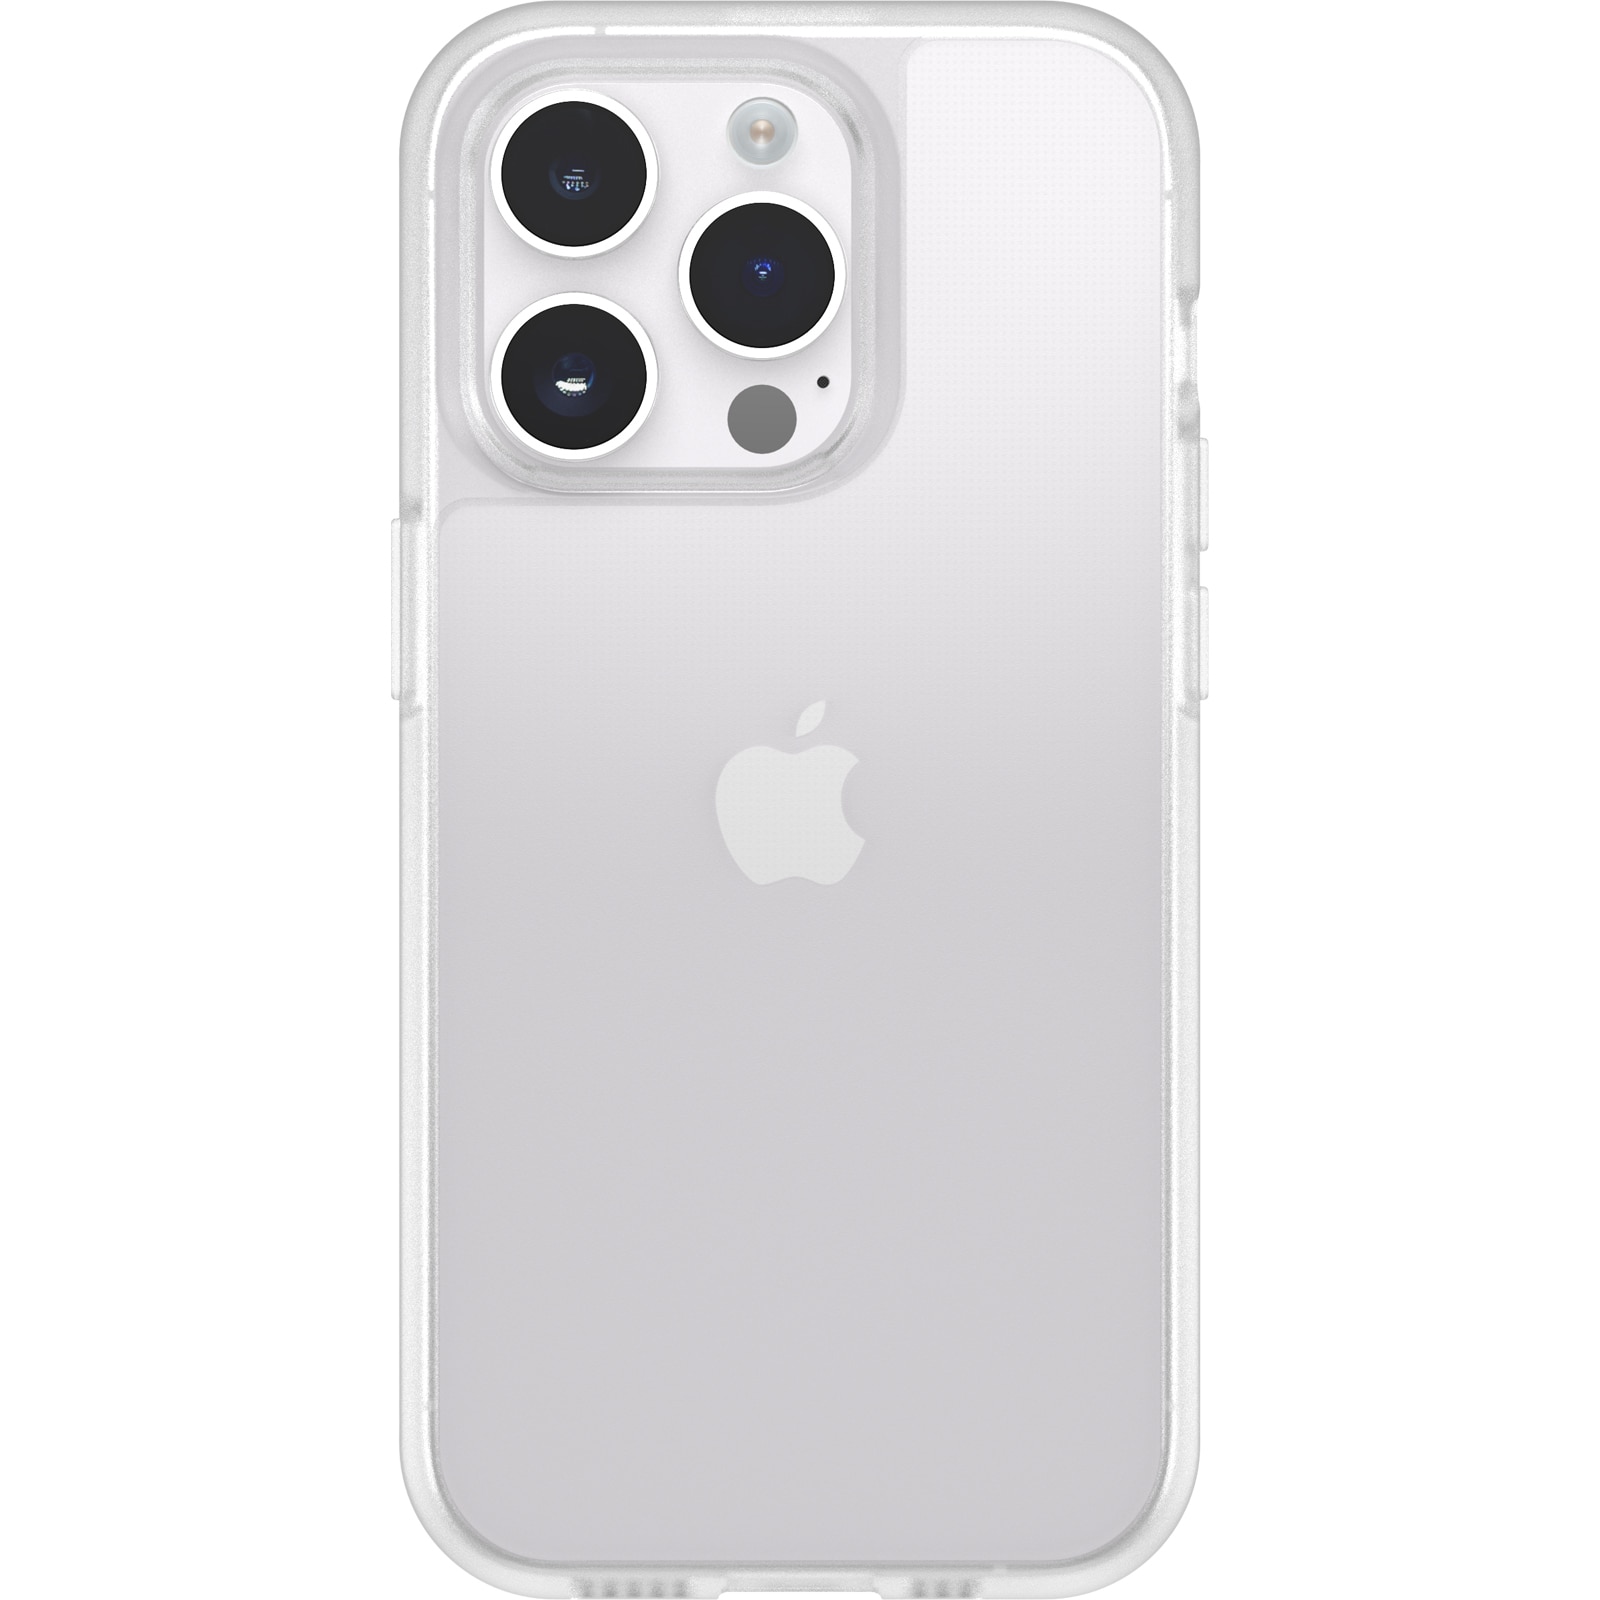 Coque React iPhone 14 Pro, Clear